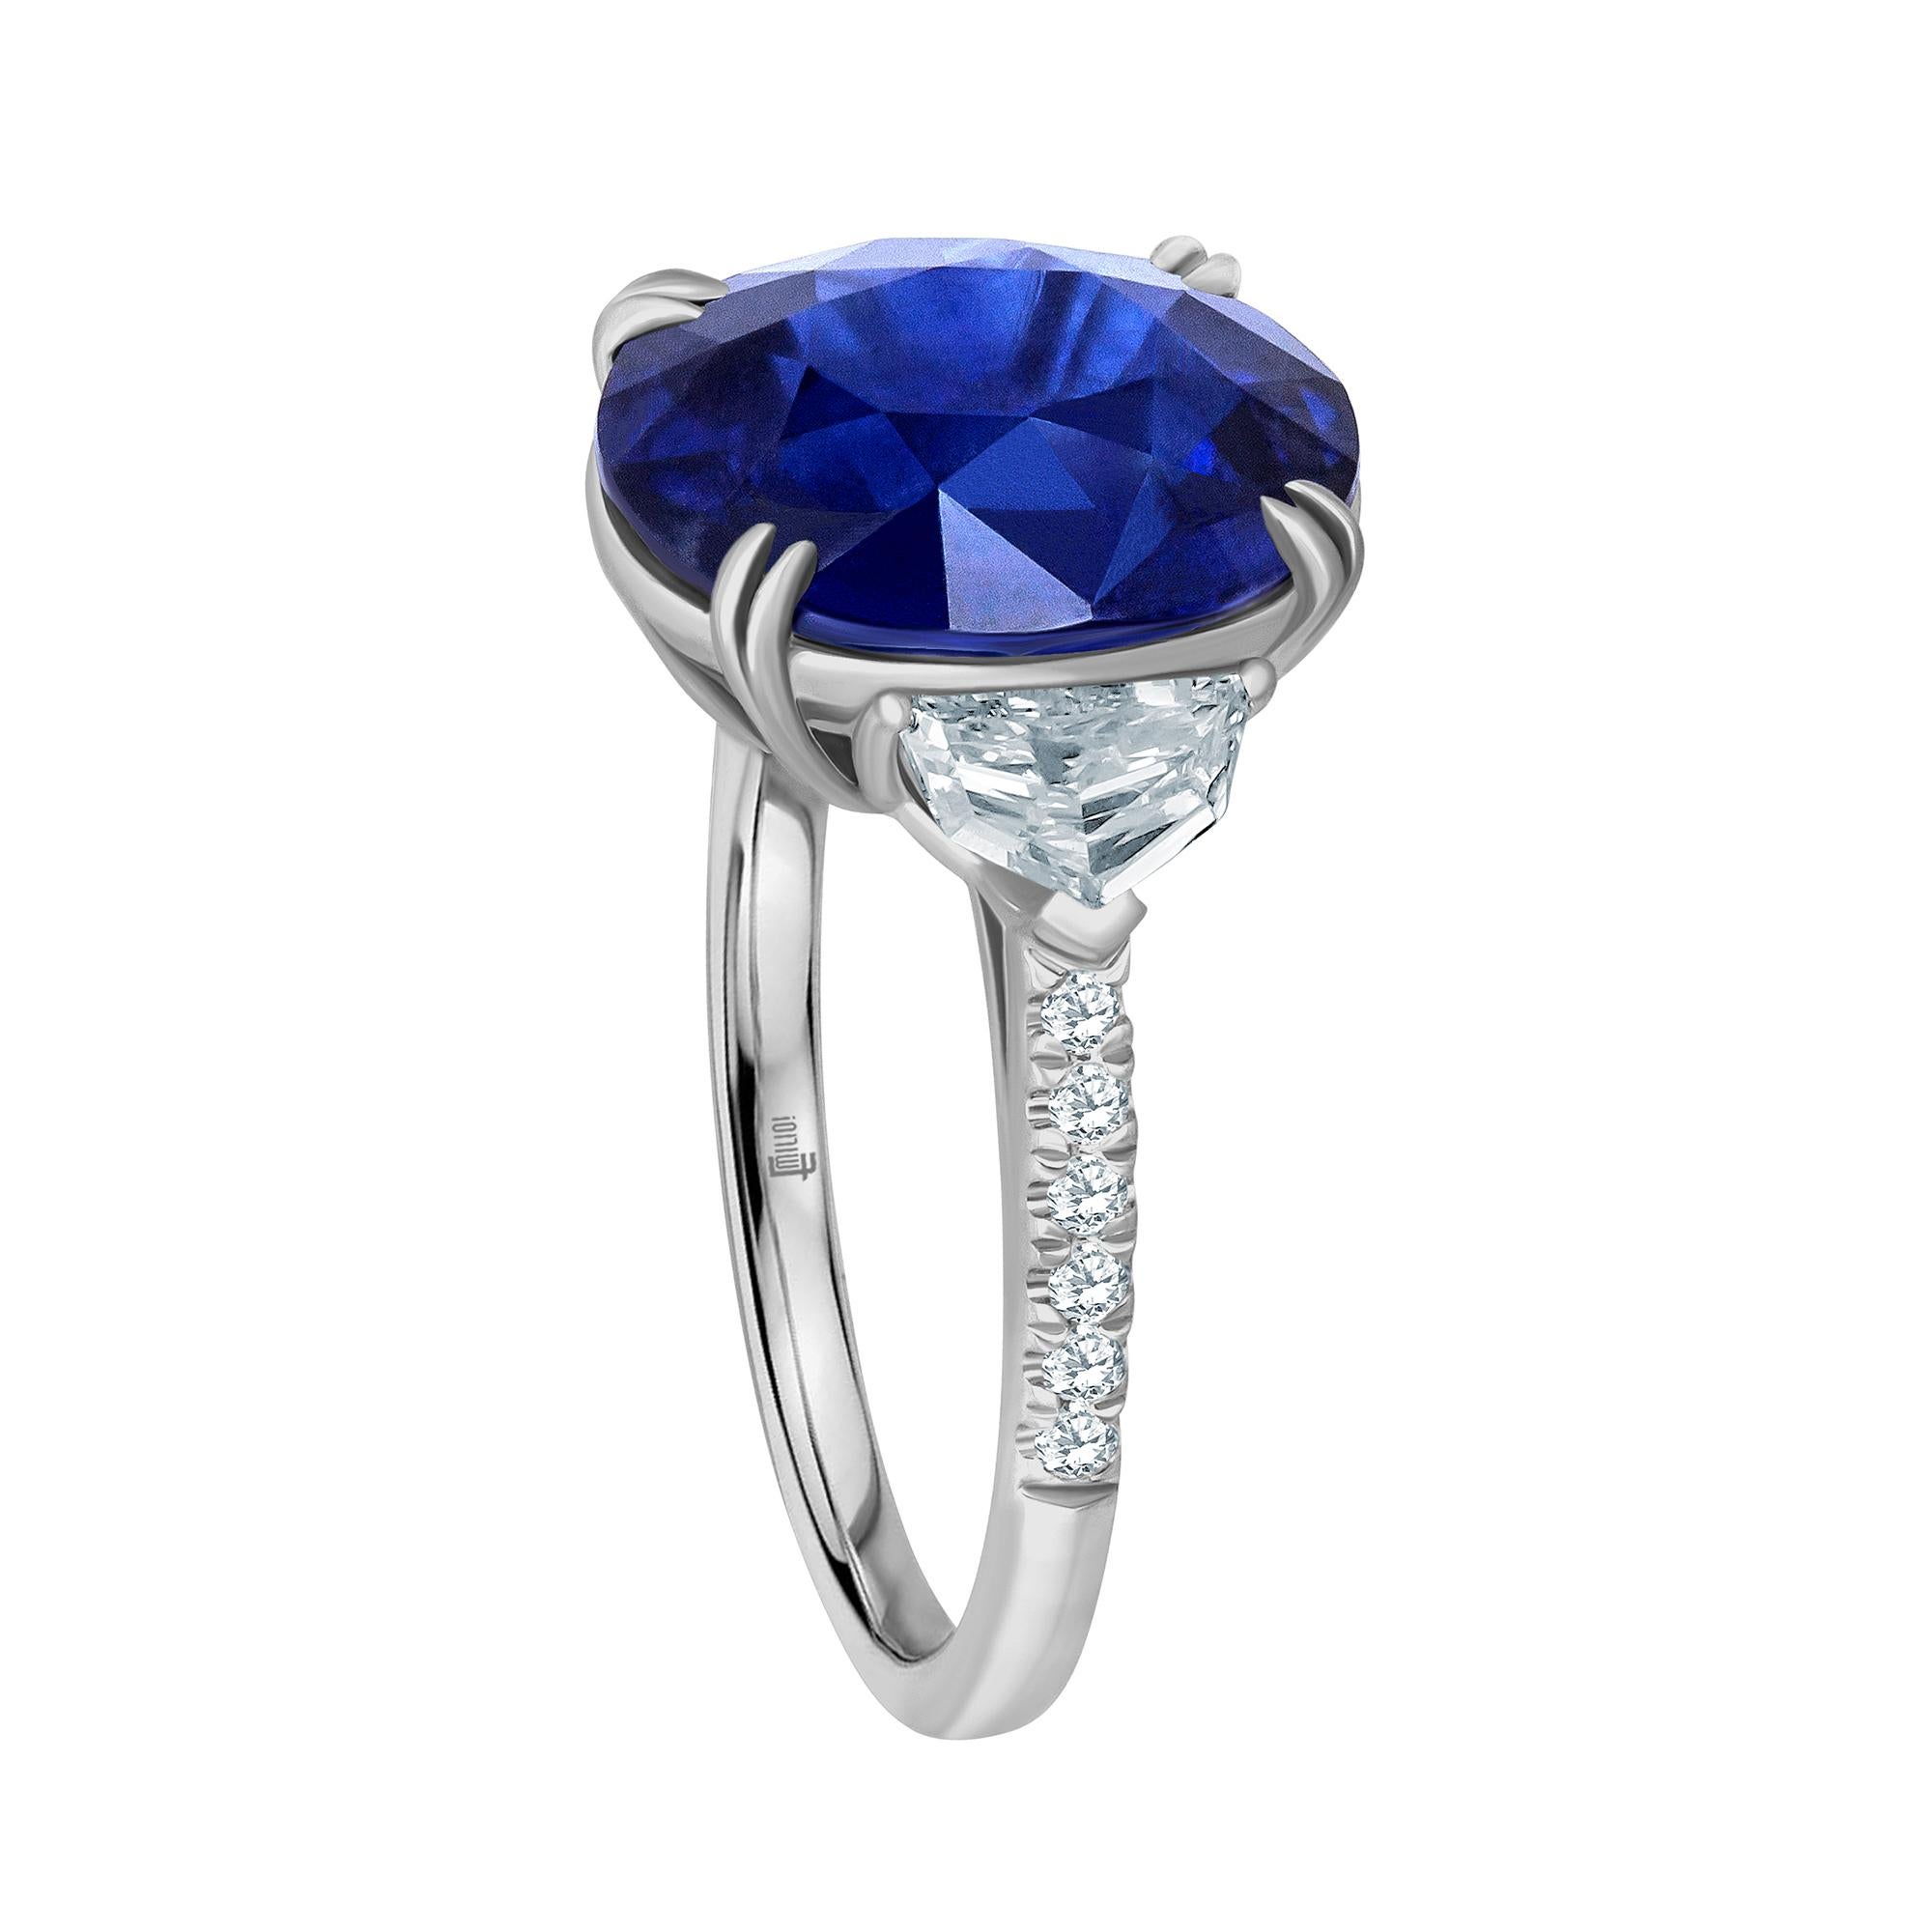 
Showcasing a gorgeous 8.05ct genuine oval Cut Sapphire Certified AGL and by C.Dunaigre. The Sapphire color certified as Vivid Blue also known as royal blue. It has lots of sparkle. The origin is Ceylon/Sri Lanka and only heat treated. (if you only